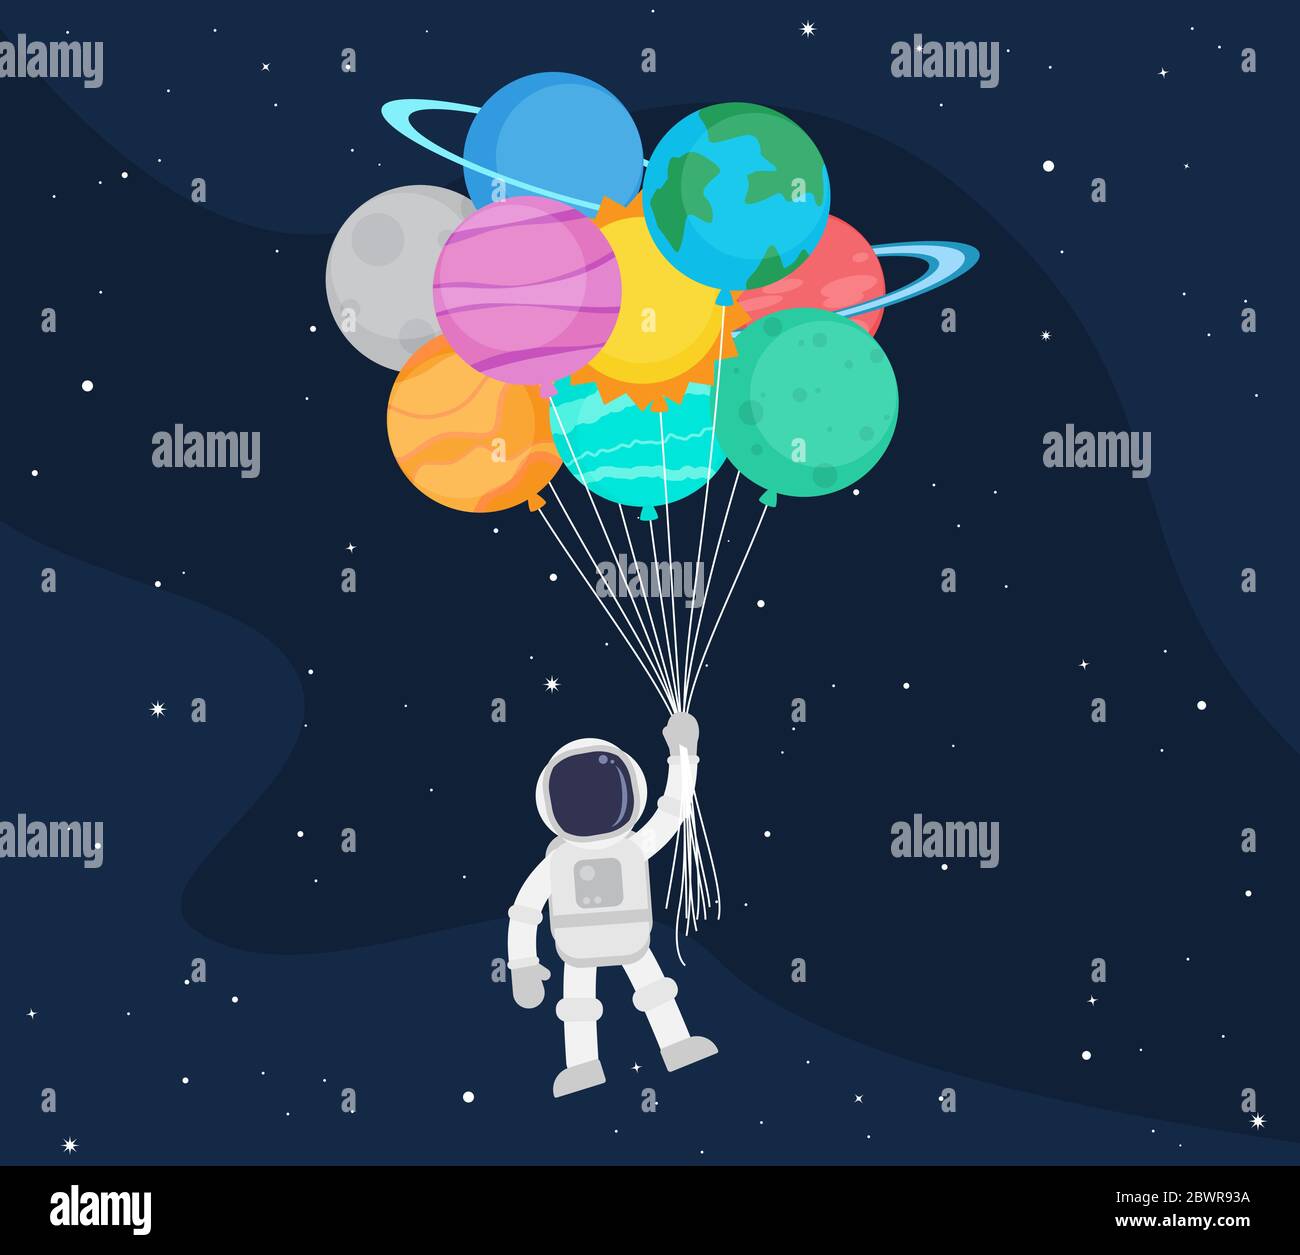 Cute astronaut cartoon floating with balloon planet in space background - Vector illustration Stock Vector